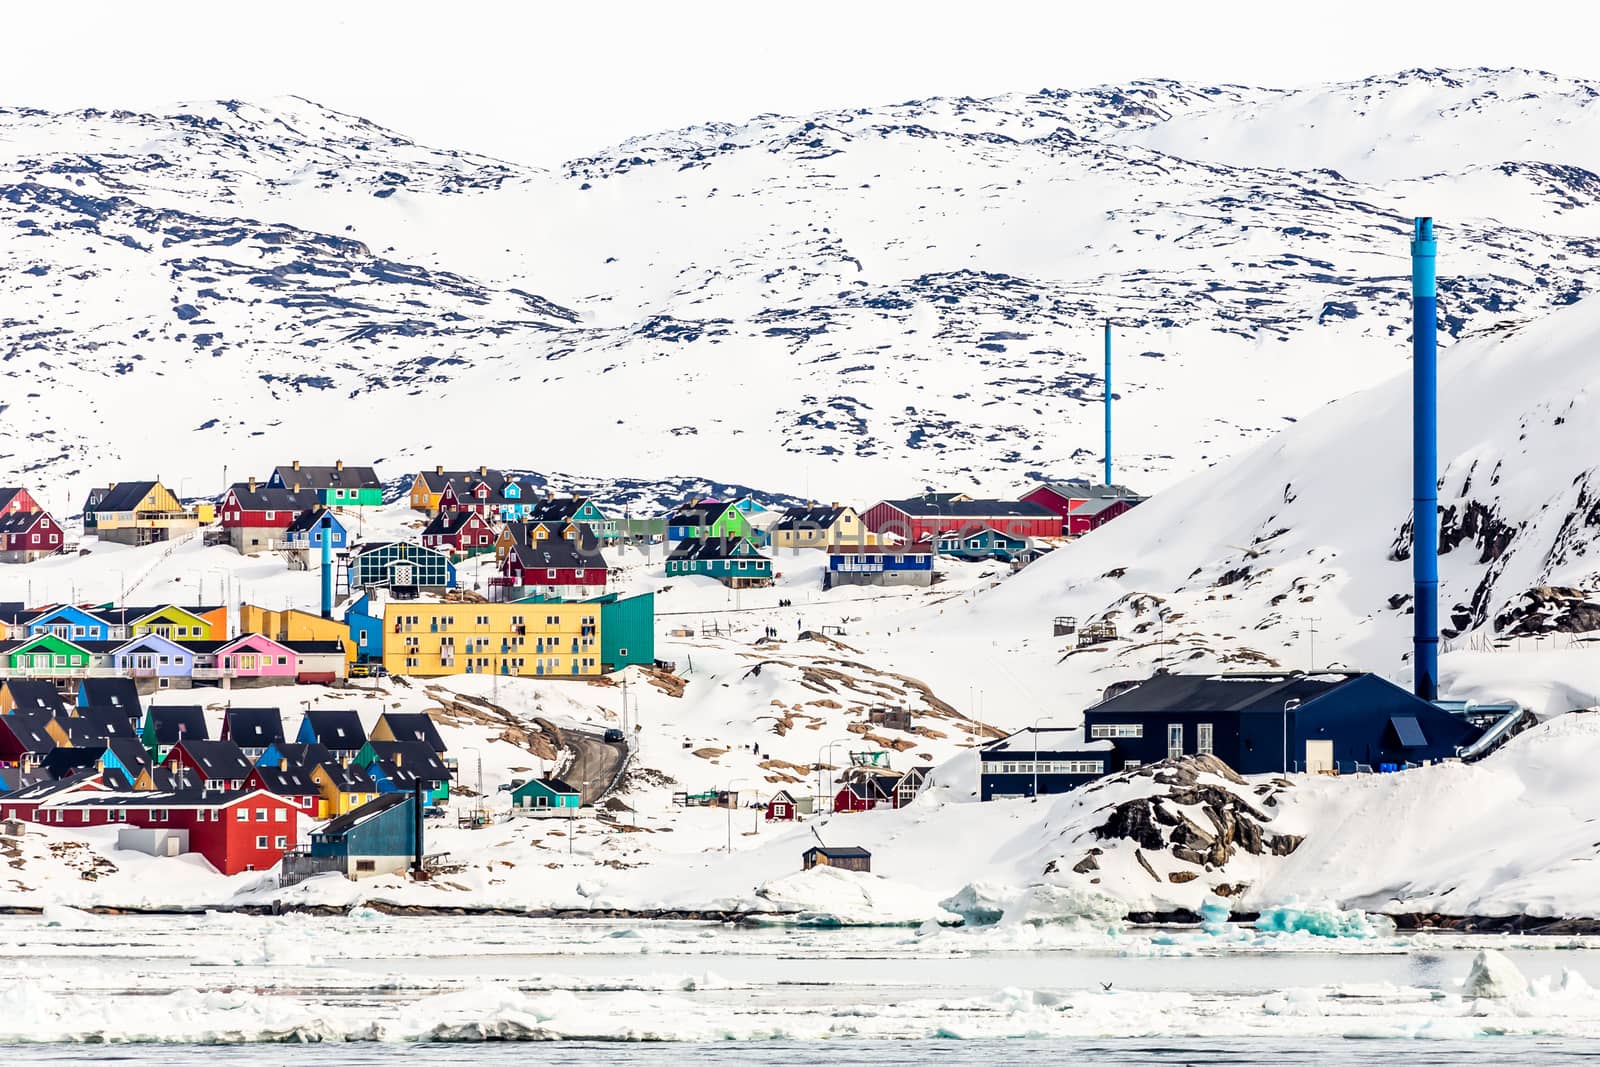 Arctic city panorama with colorful Inuit cottages and powerplant on the rocky hills covered in snow and mountain in the background, Ilulissat, Avannaata municipality, Greenland